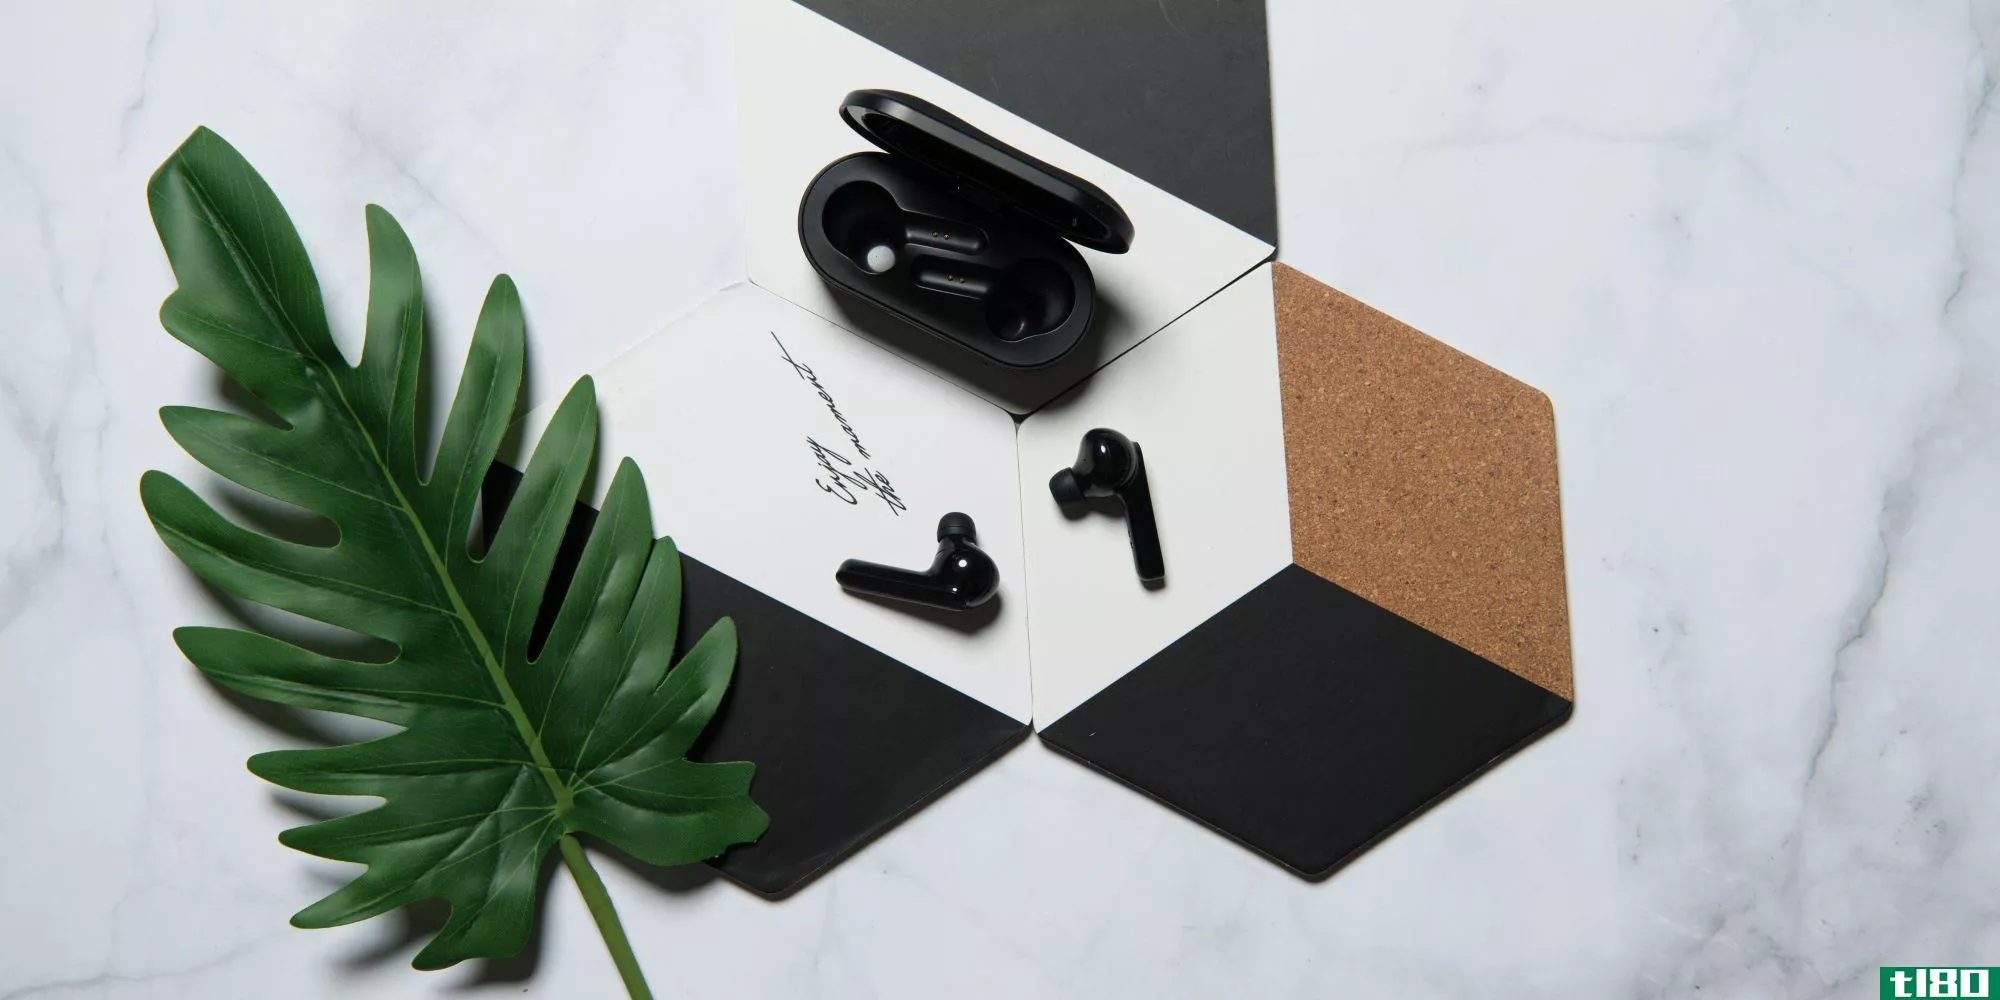 Mobvoi Earbuds Gesture earbuds with case on decorative tiles